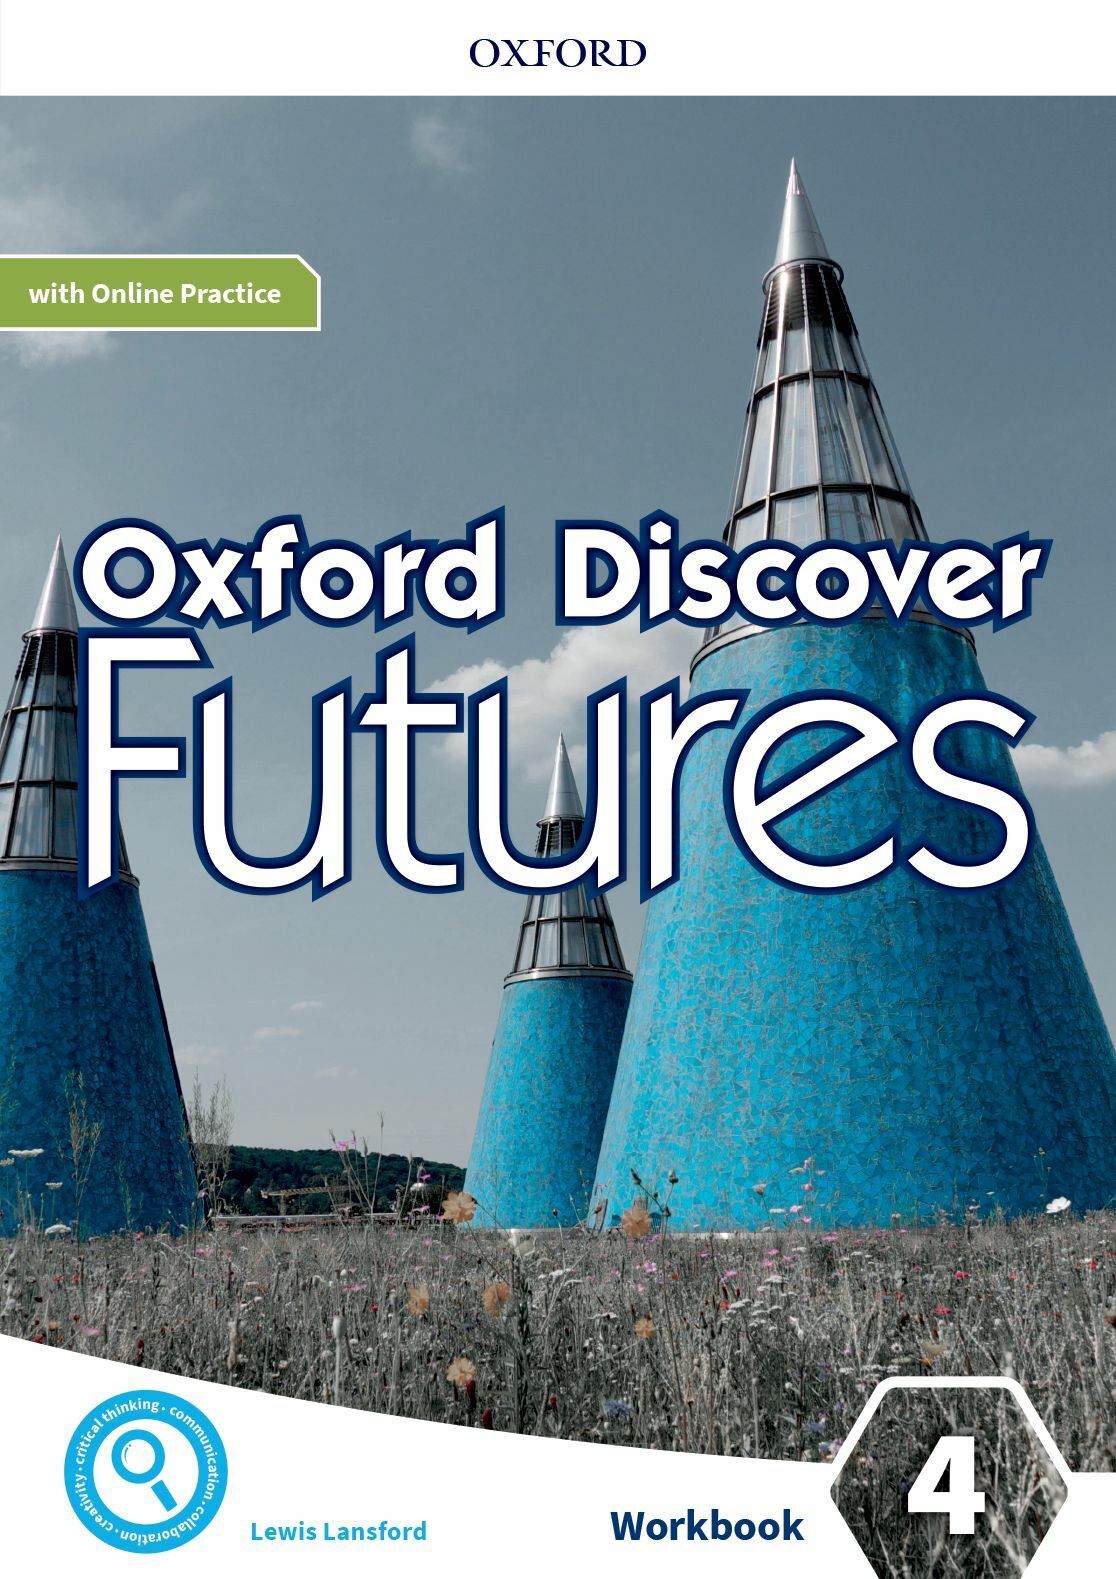 Oxford Discover Futures Level 4: Workbook with Online Practice (Paperback)